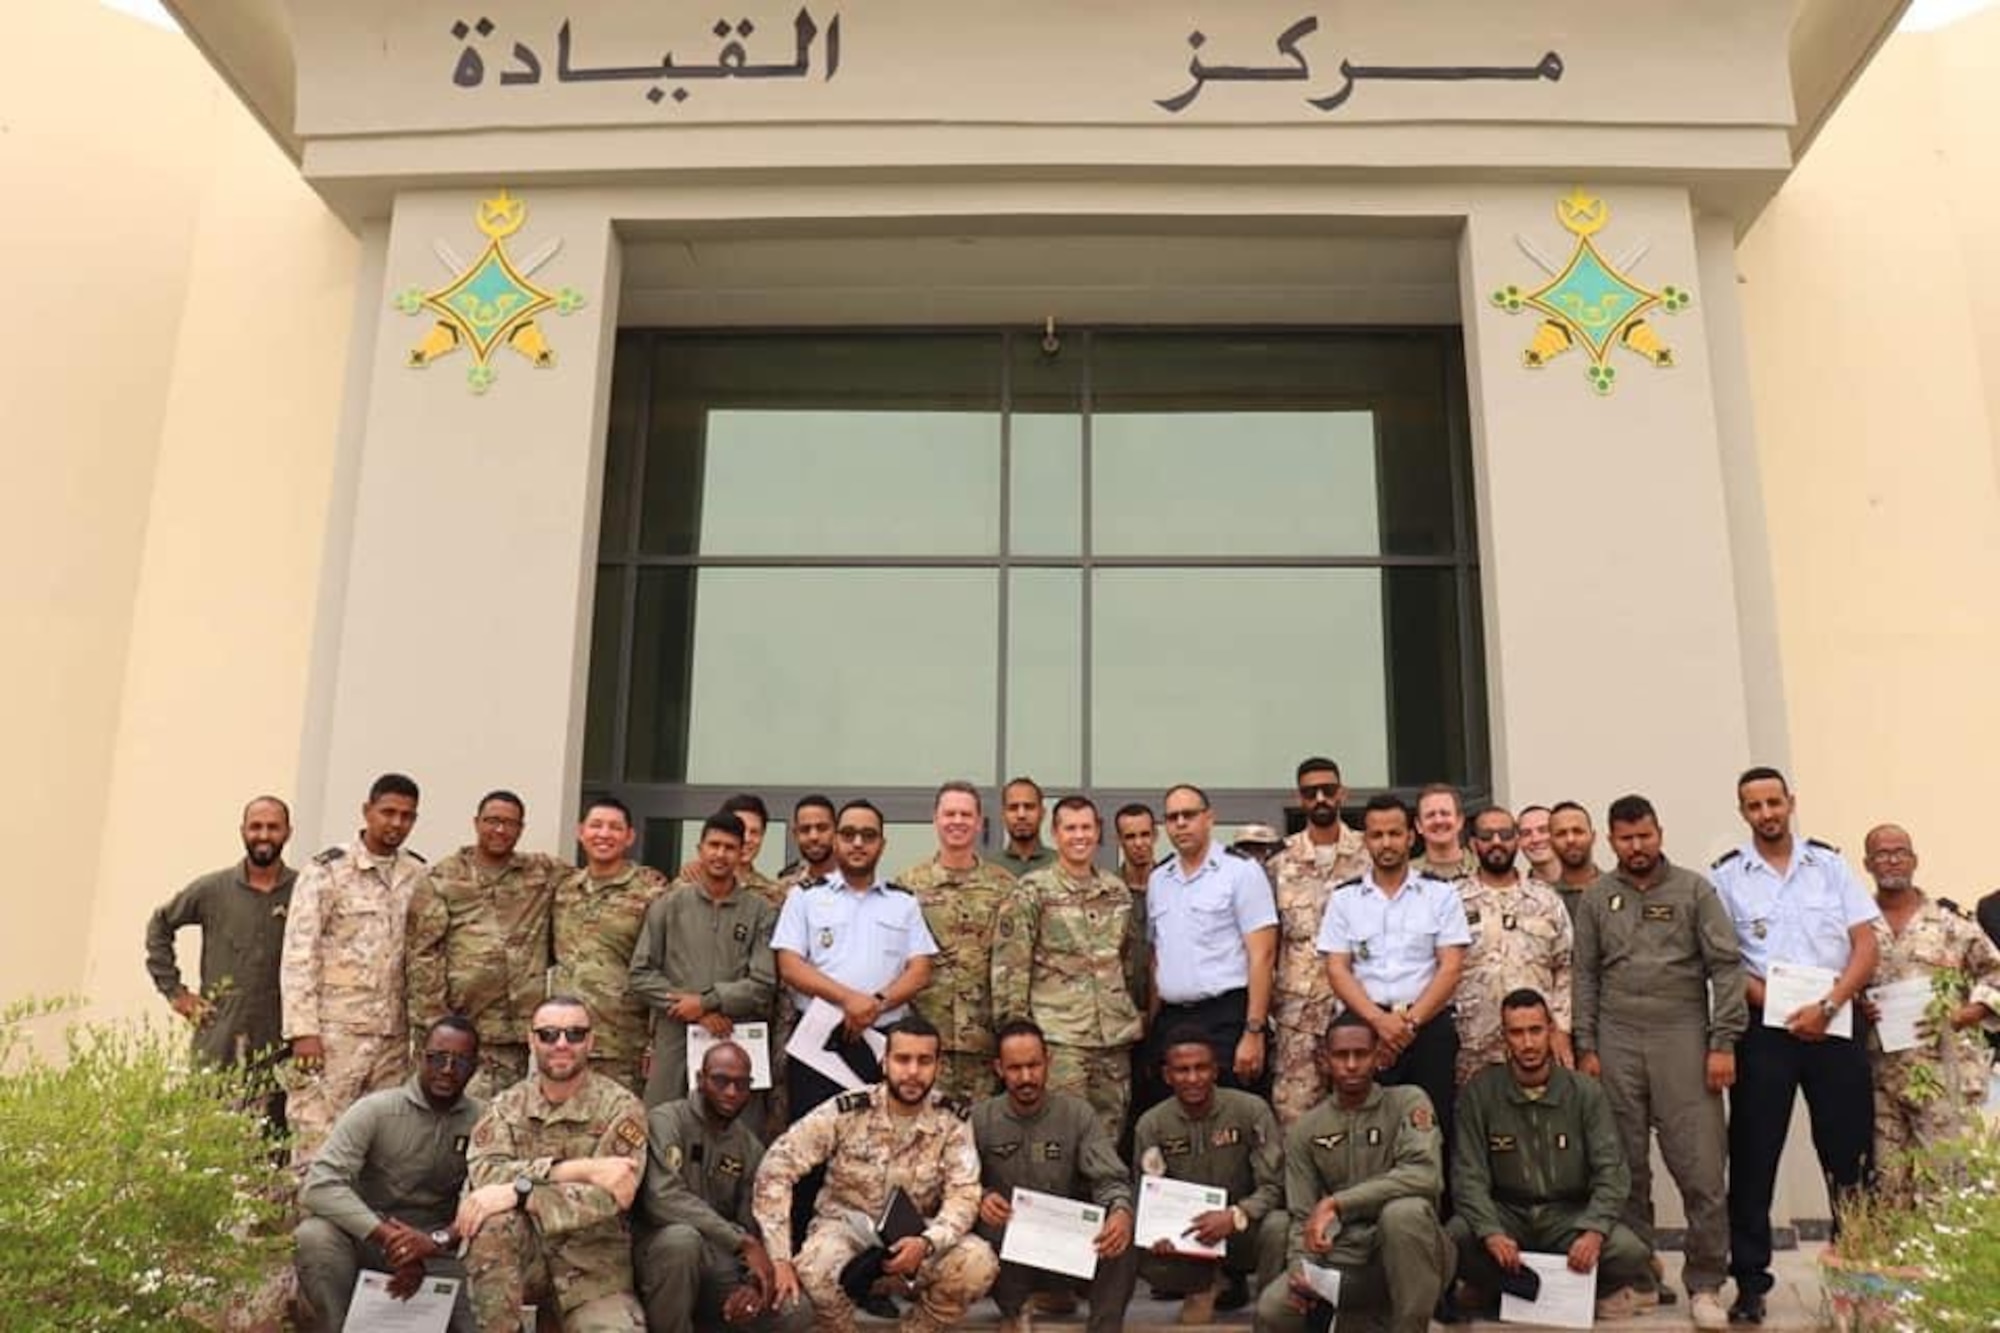 The 818th Mobility Support Advisory Squadron air advisors and Mauritanian Air Force students pose for a group photo following their graduation July 28, 2022, Nouakchott, Mauritania. Air advisors provided aircraft wiring fundamentals and aircrew ground training in support of the Mauritanian Air Force's AC-208 Combat Caravan program.